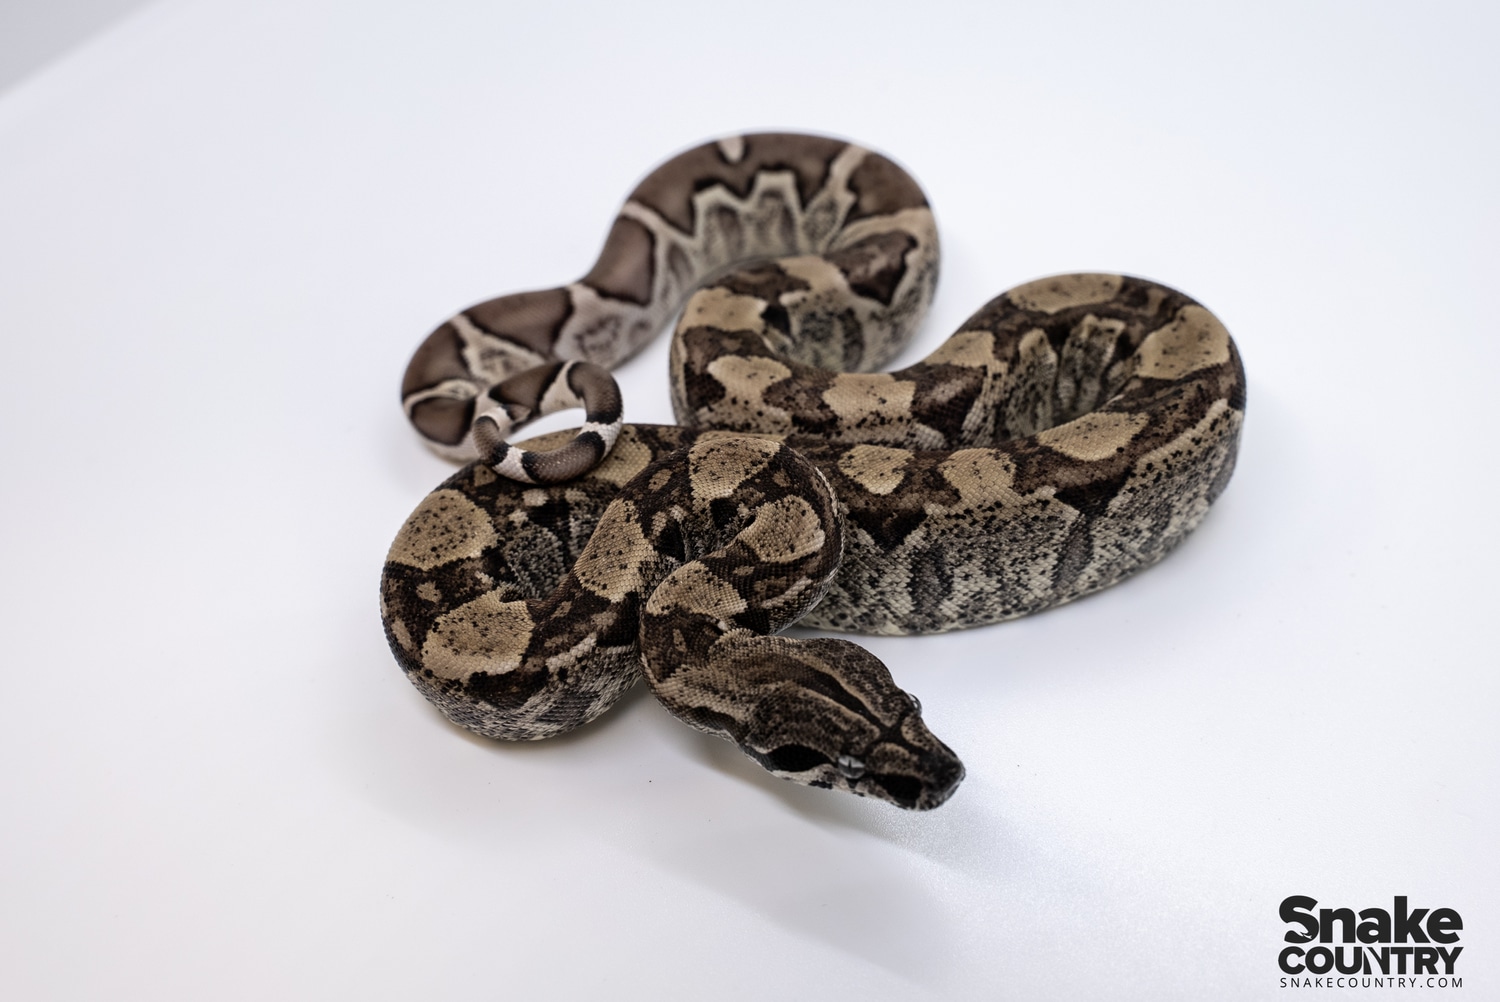 Ghost IMG 66% Het VPI Boa Constrictor by Snake Country